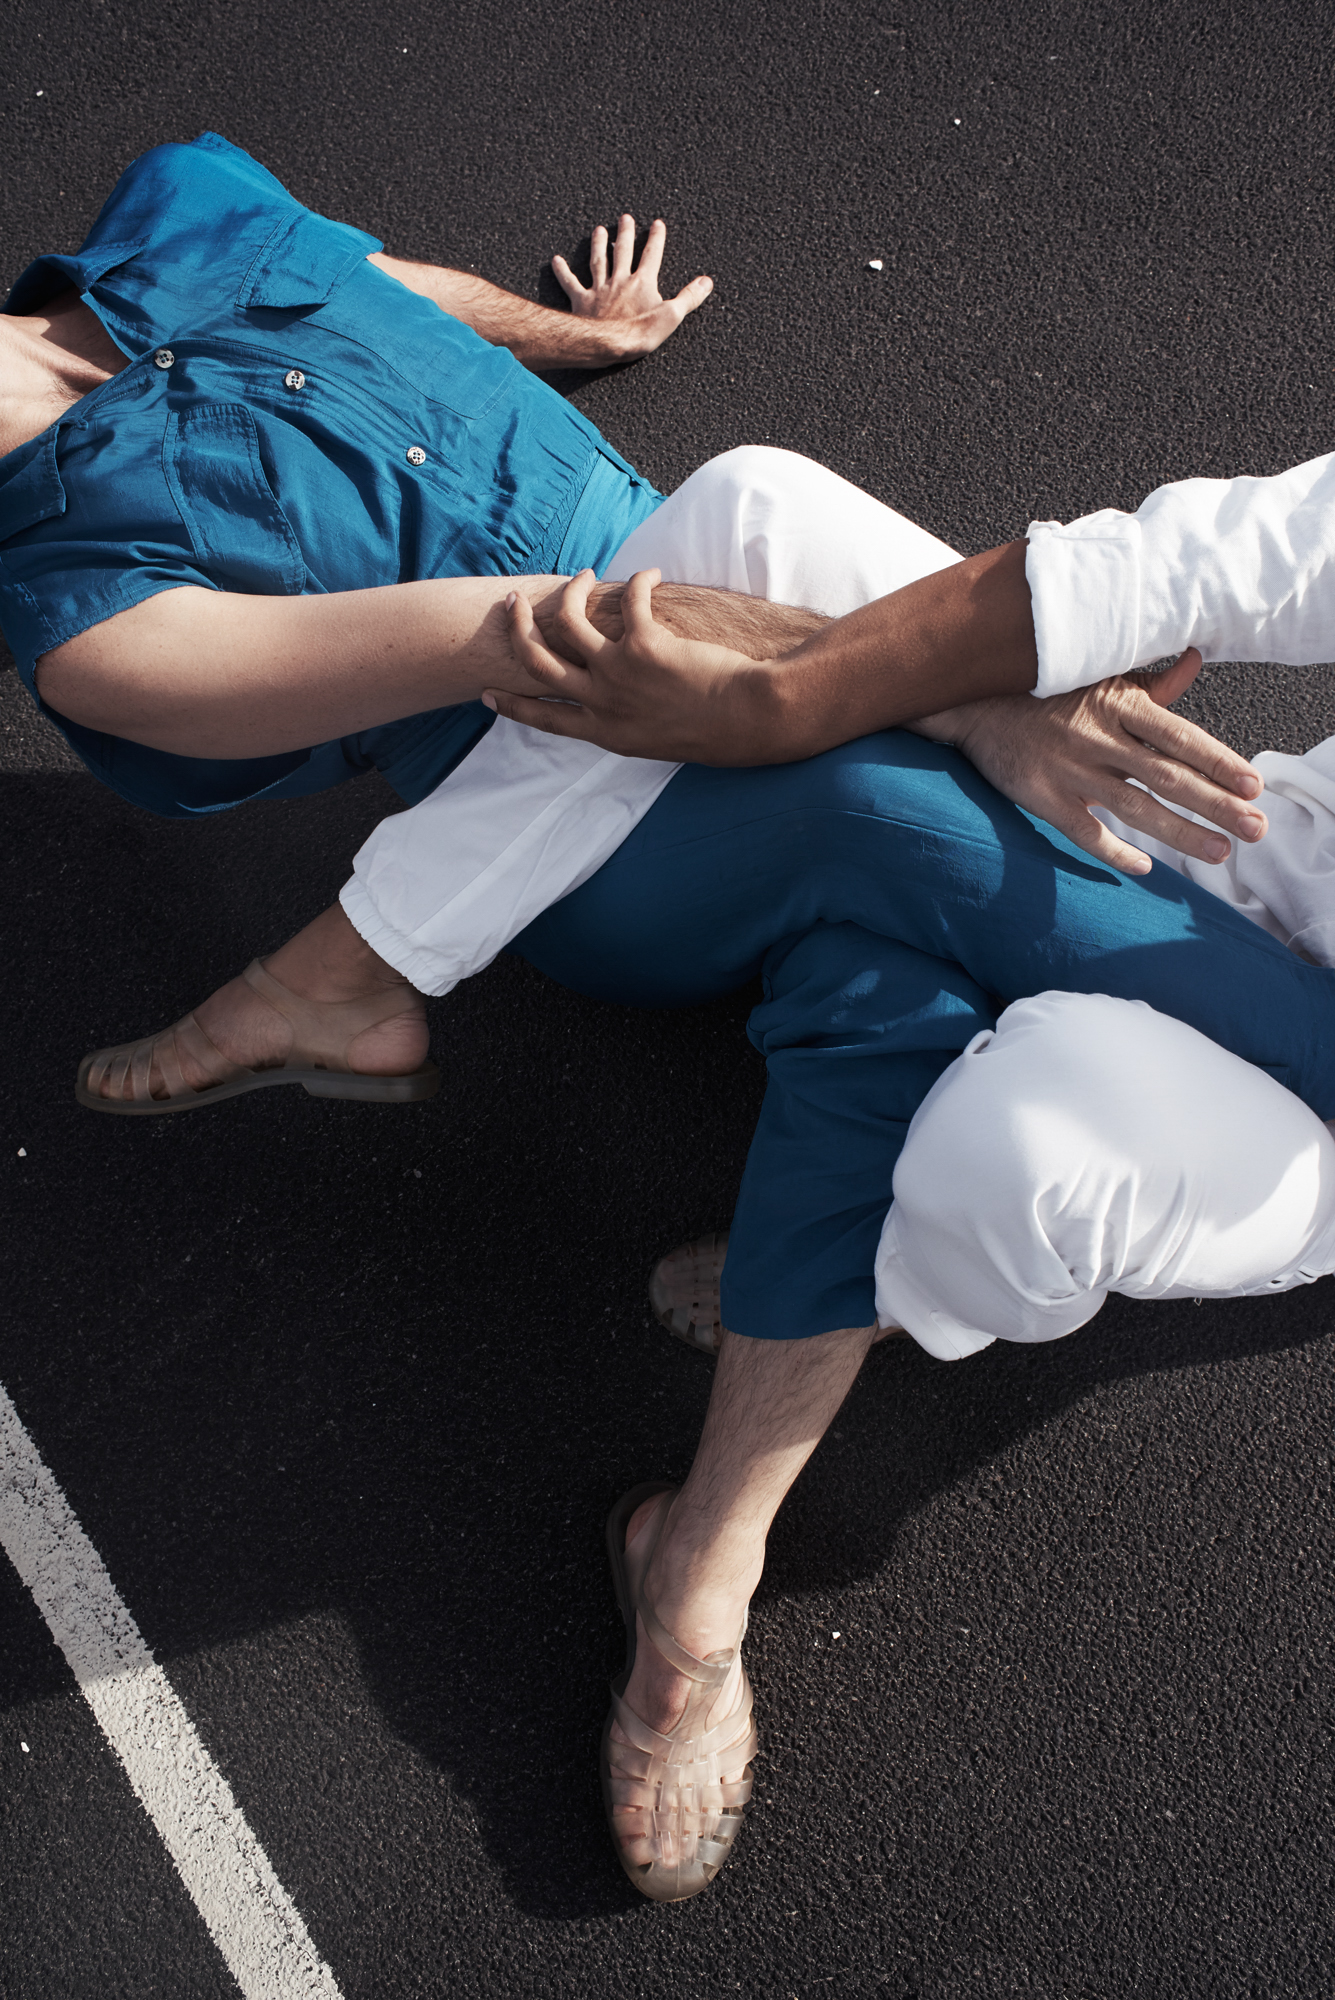 Two people, one wearing white, the other bright blue, sit on black pavement and wrap their legs around each other, arms clasped and arching away, with their faces out of frame.